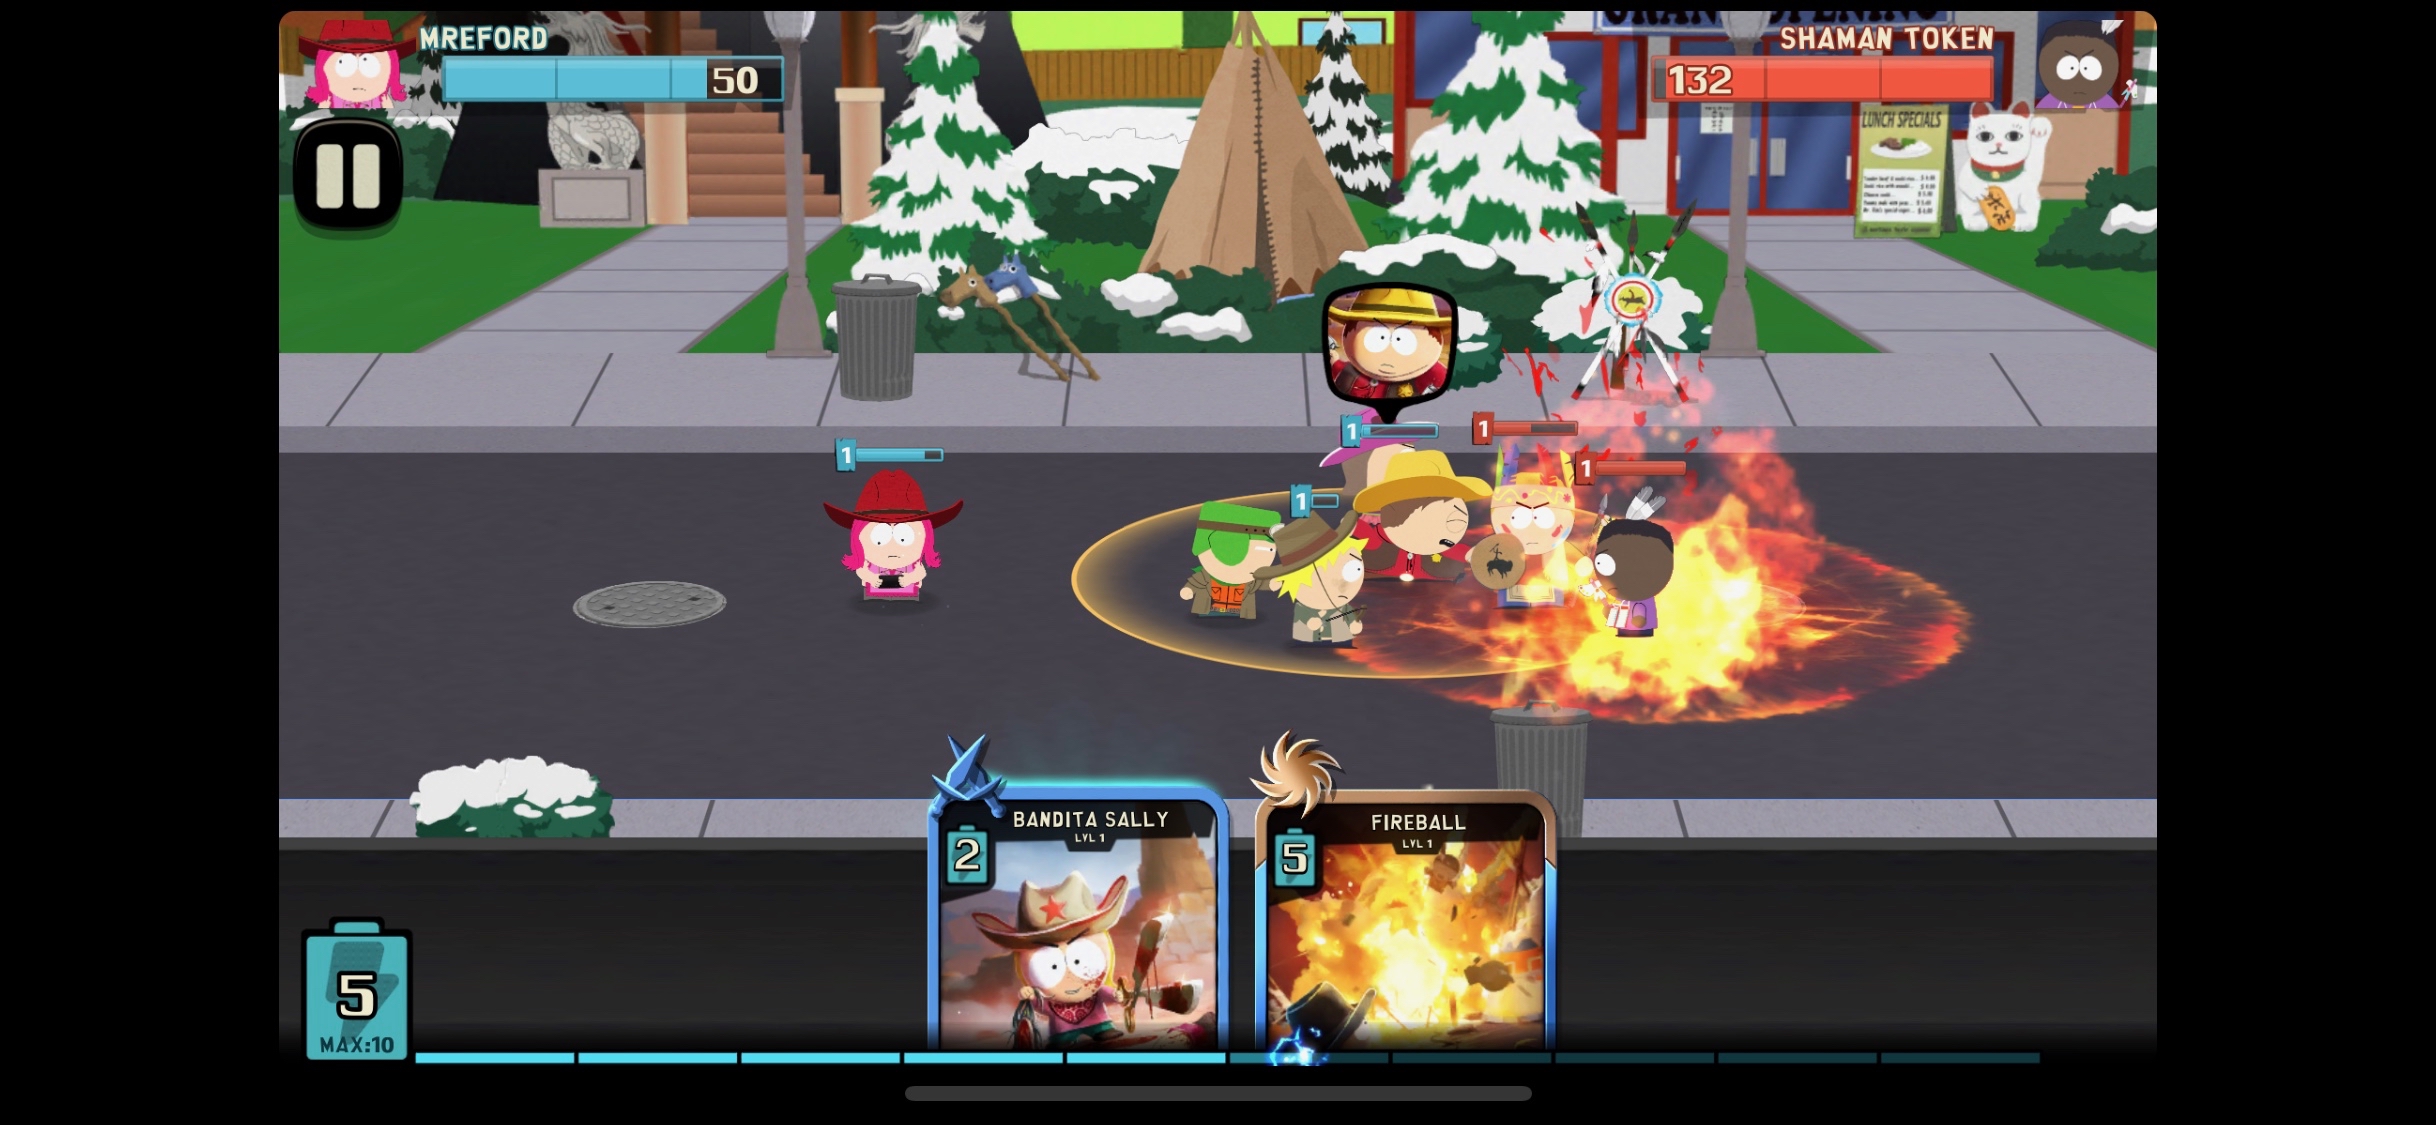 'South Park: Phone Destroyer' Guide: How to Win Without Spending Real Money - TouchArcade